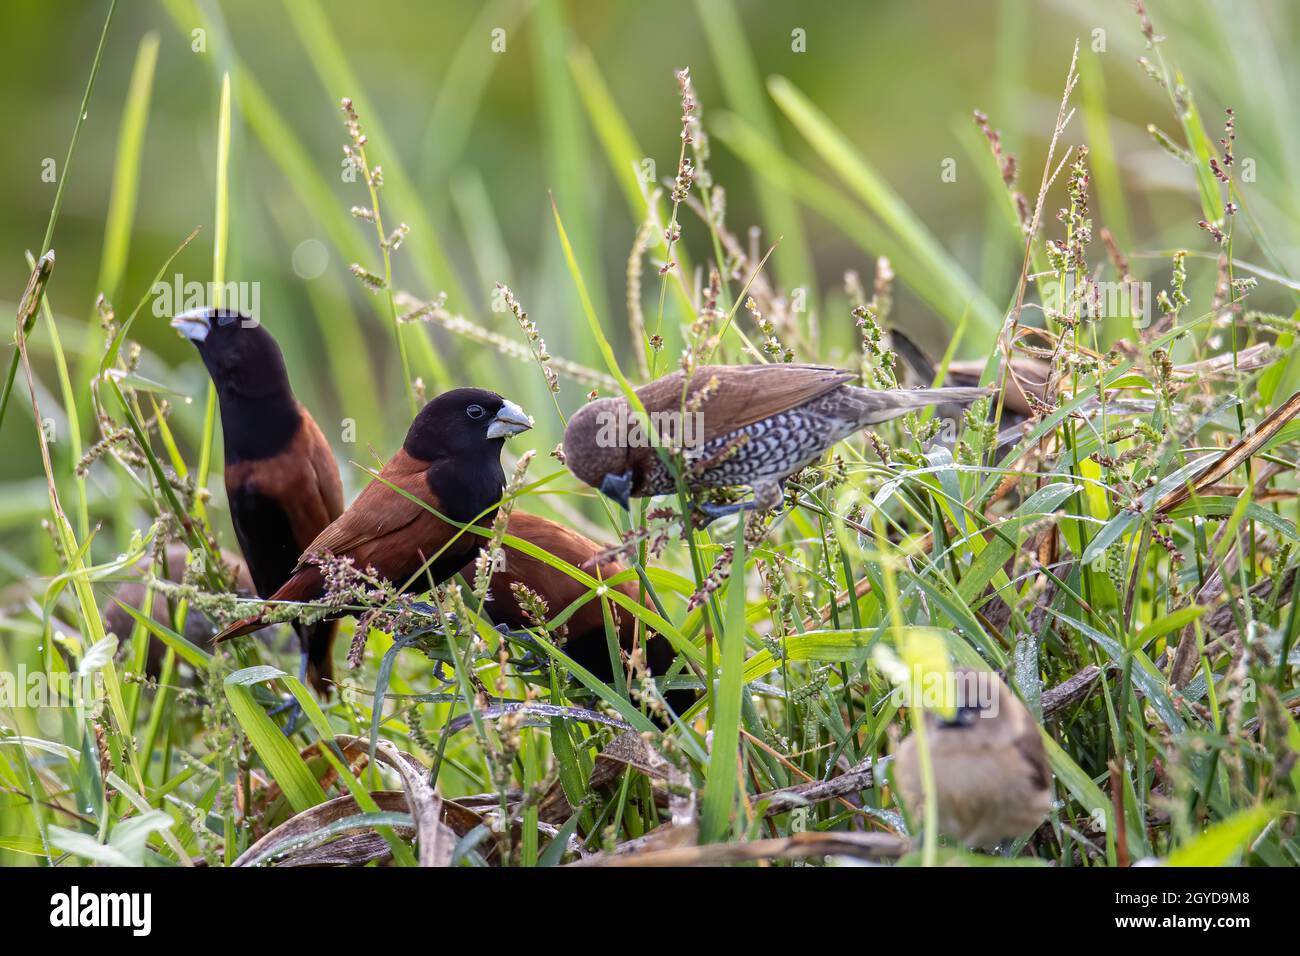 Group of various types of birds pipits standing on grass at paddy field Stock Photo